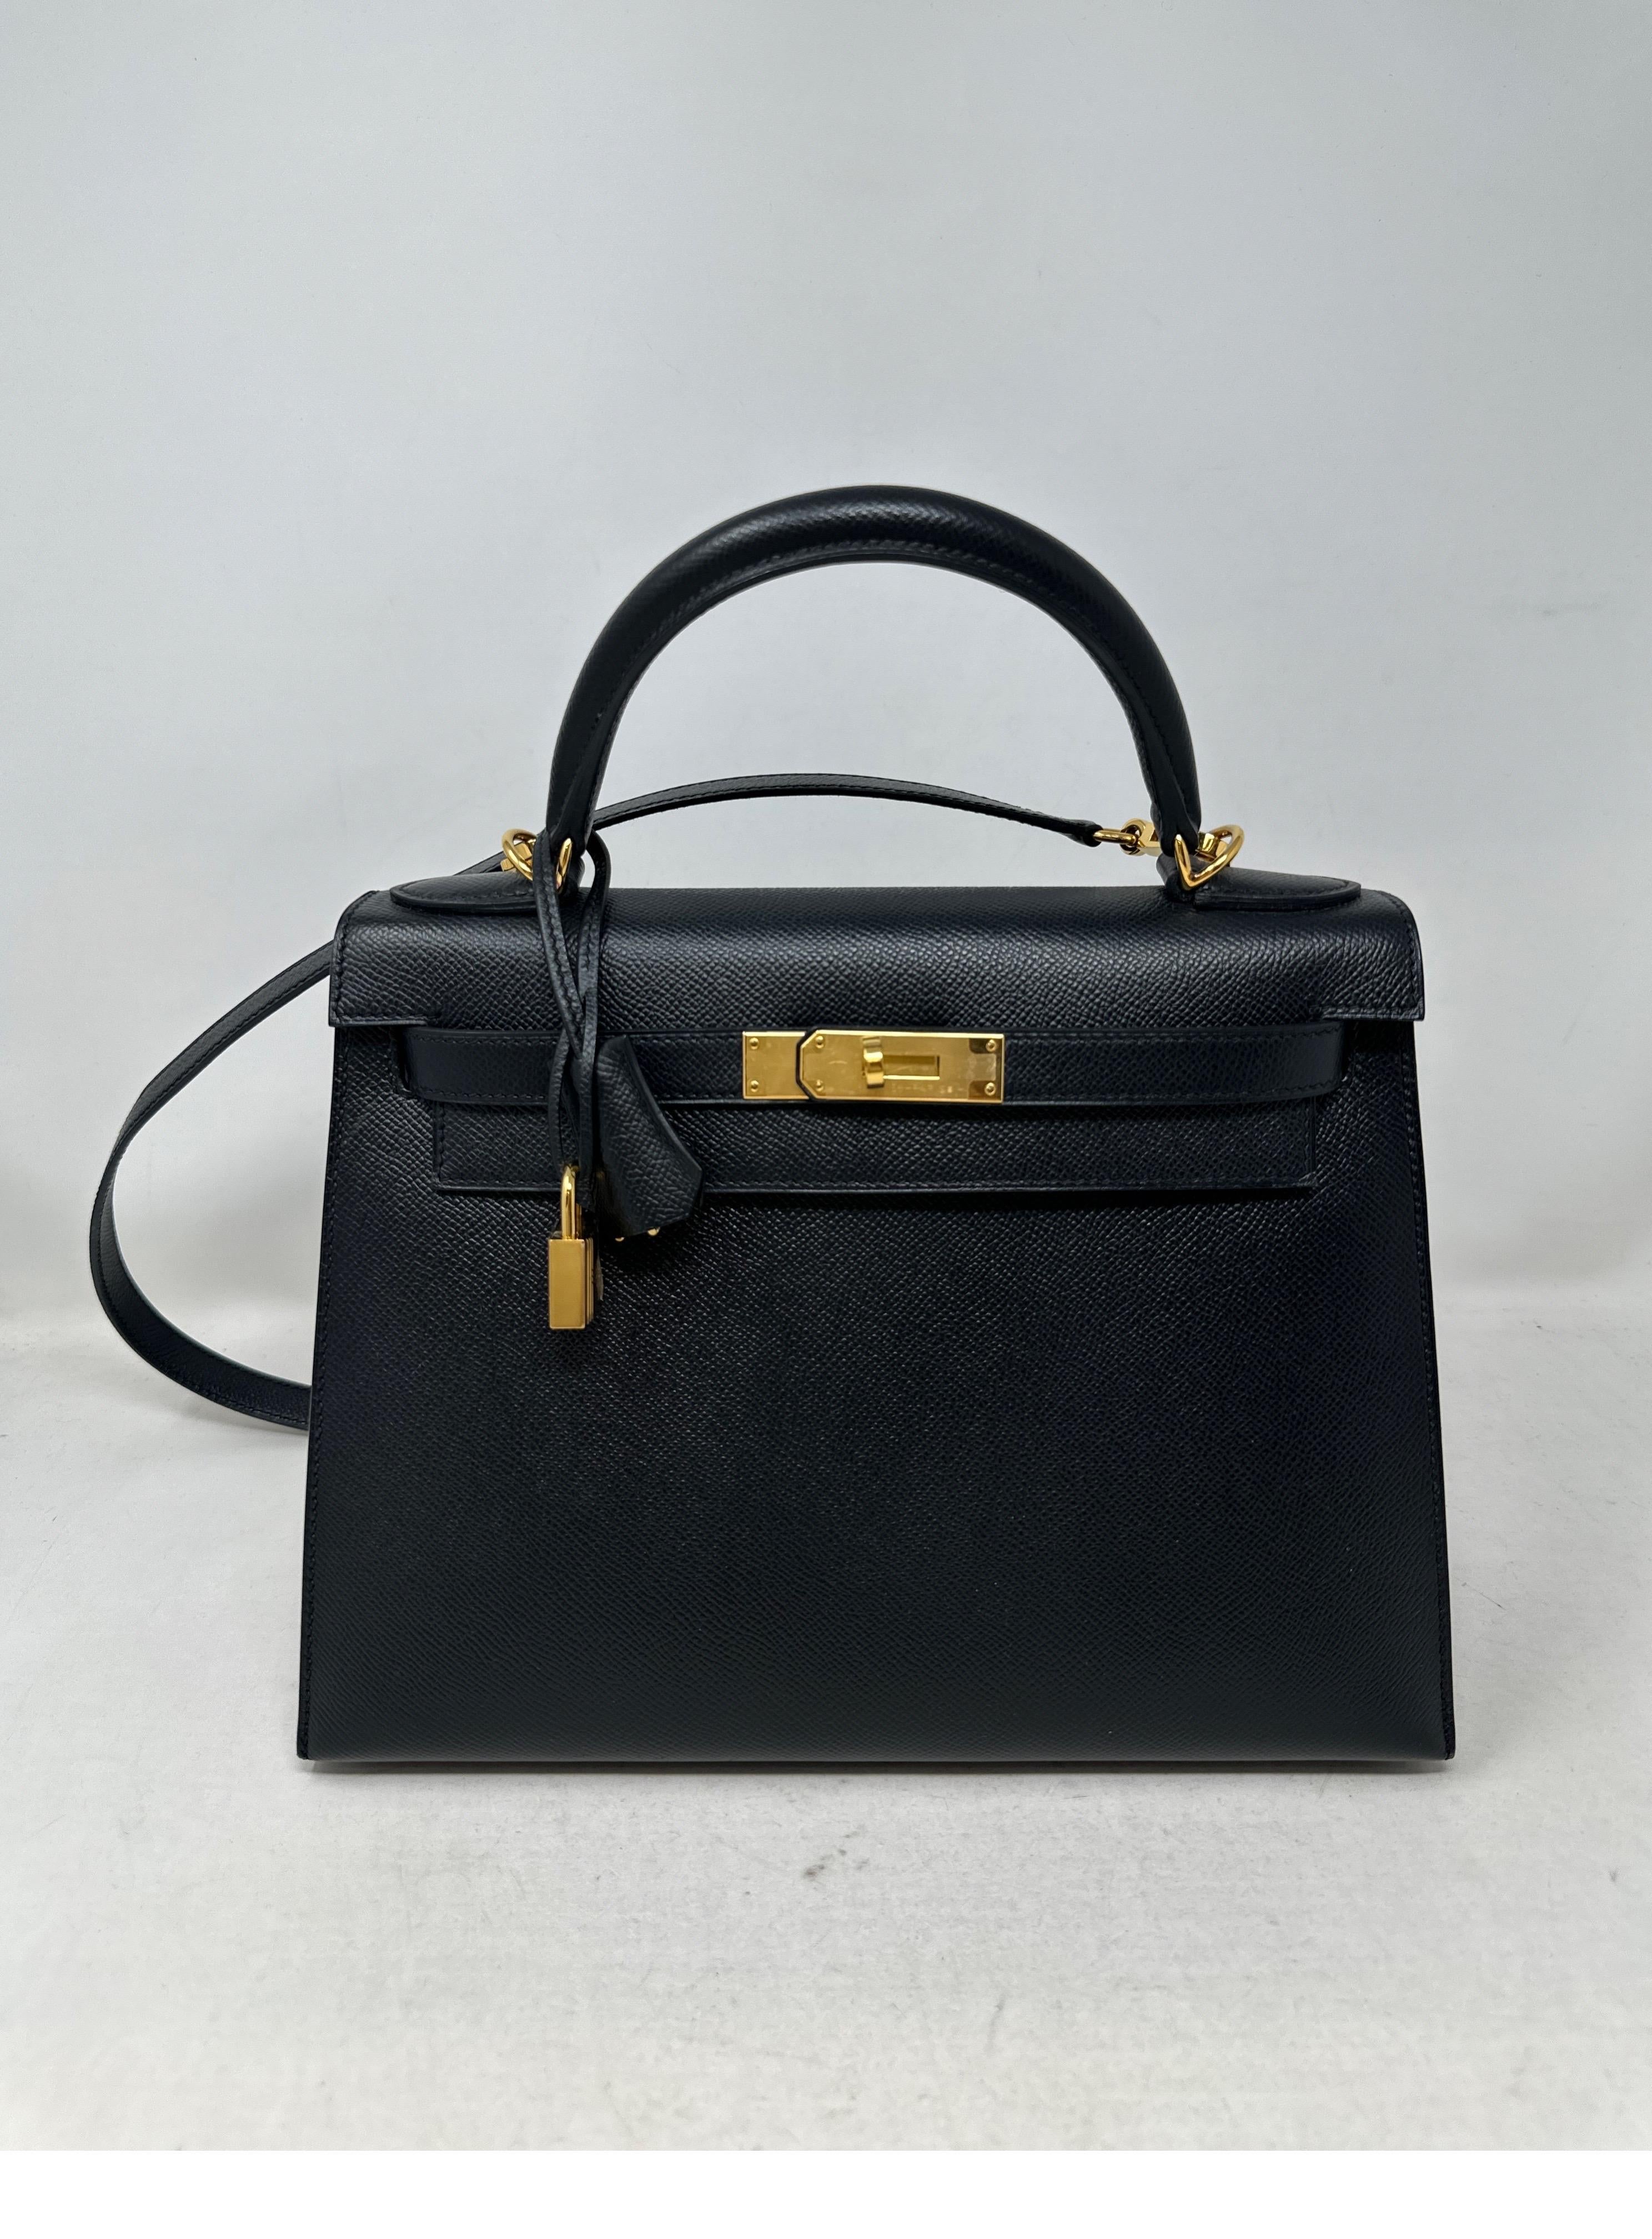 Hermes Black Kelly 28 Bag  In Excellent Condition For Sale In Athens, GA